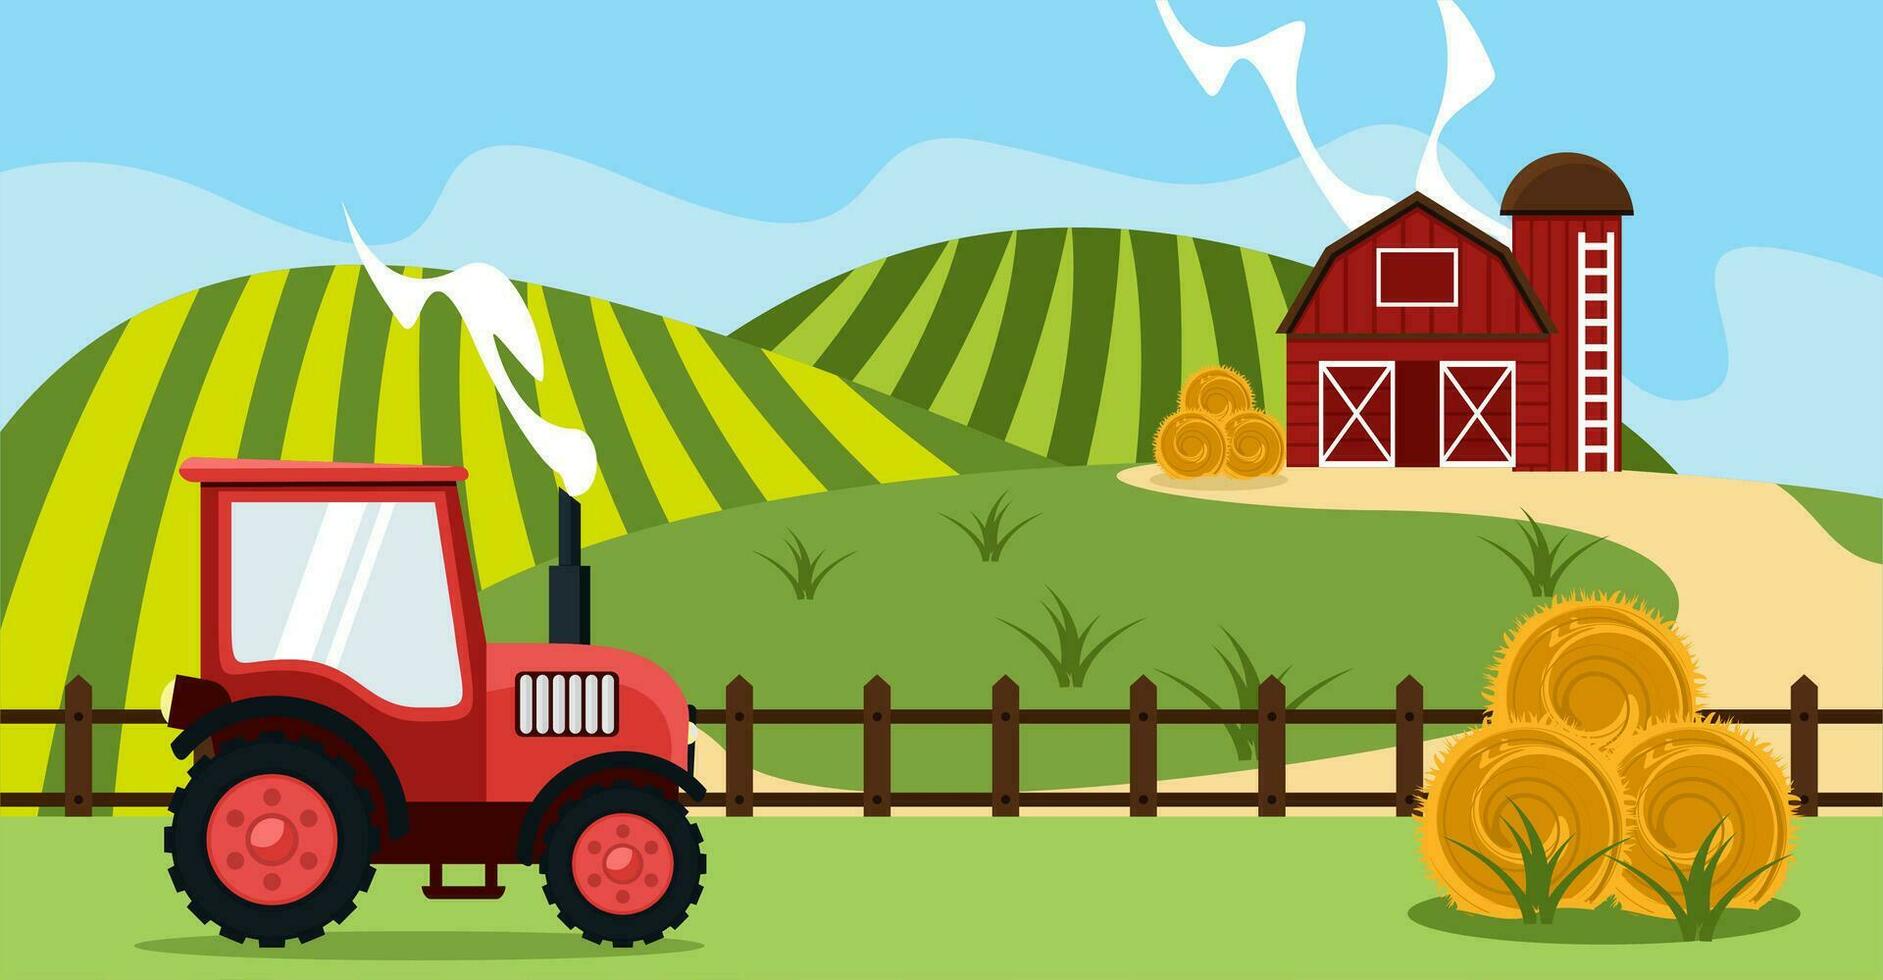 vector agricultural illustration. The atmosphere is on a farm, there is hay, goods, and farm tractors. sunny weather on the farm